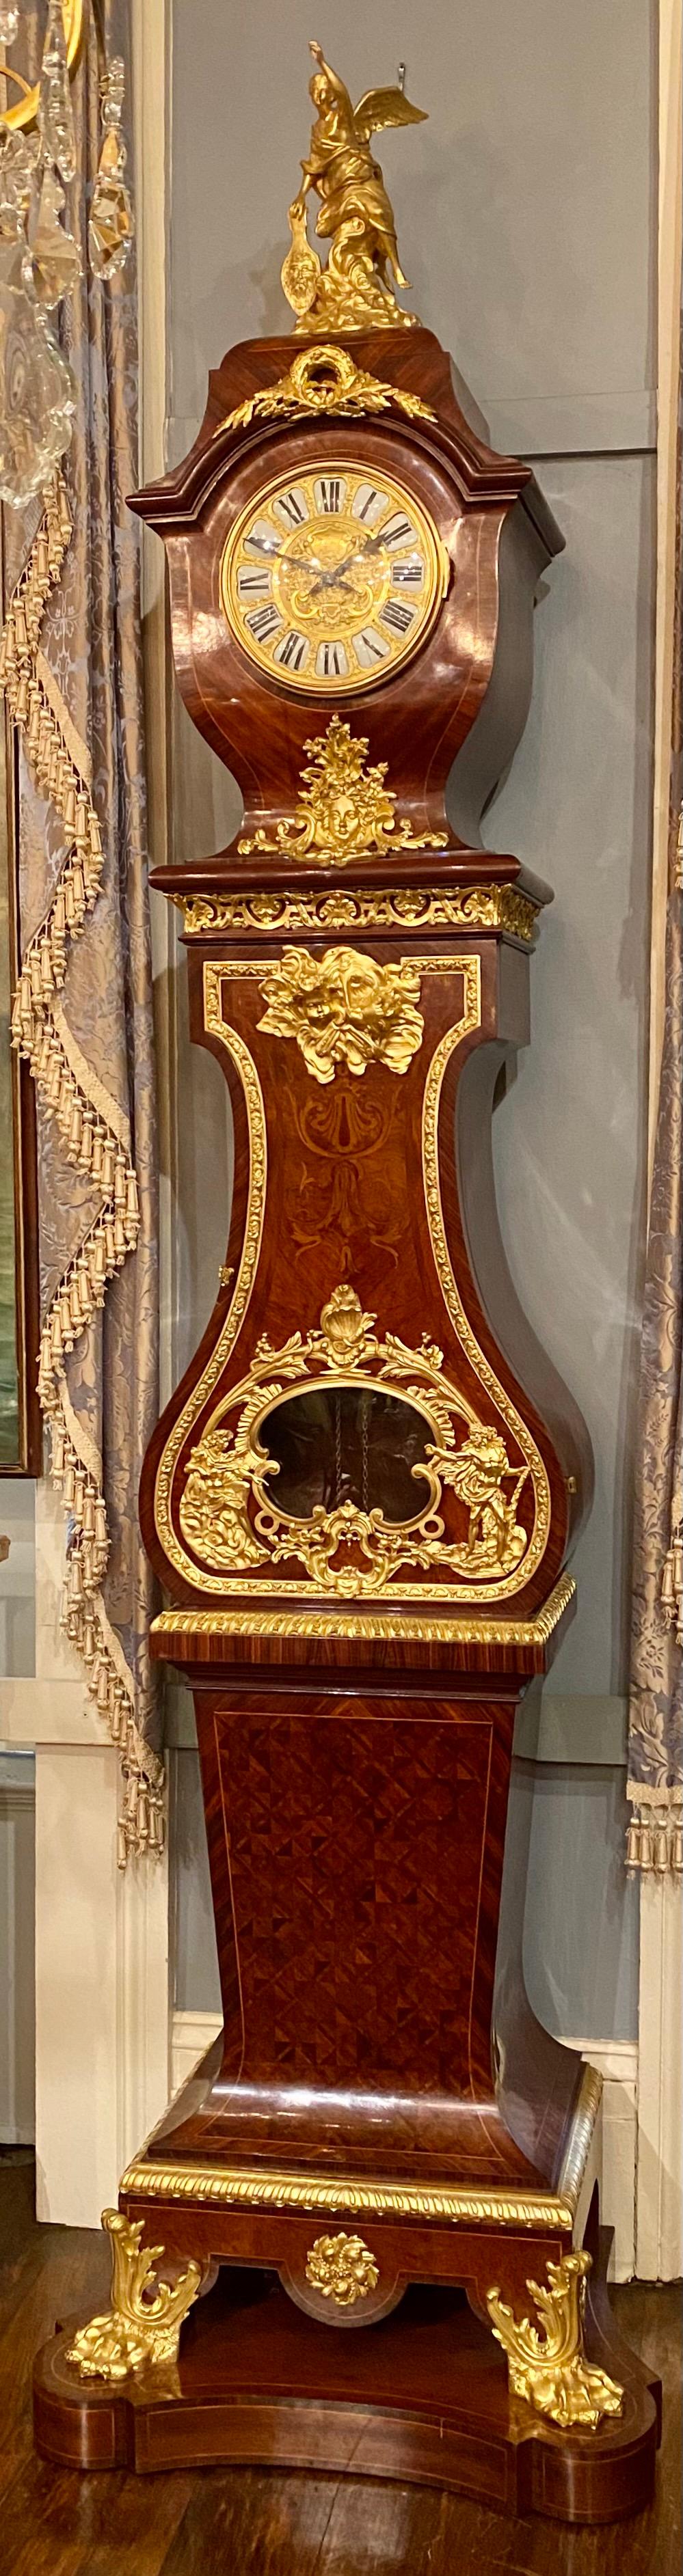 Antique French Napoleon III ormolu mounted mahogany grandfather clock Circa 1885-1890. This is a beautiful clock, with wonderful exotic wood inlays and ormolu finishings. It is in the Napoleon III style.